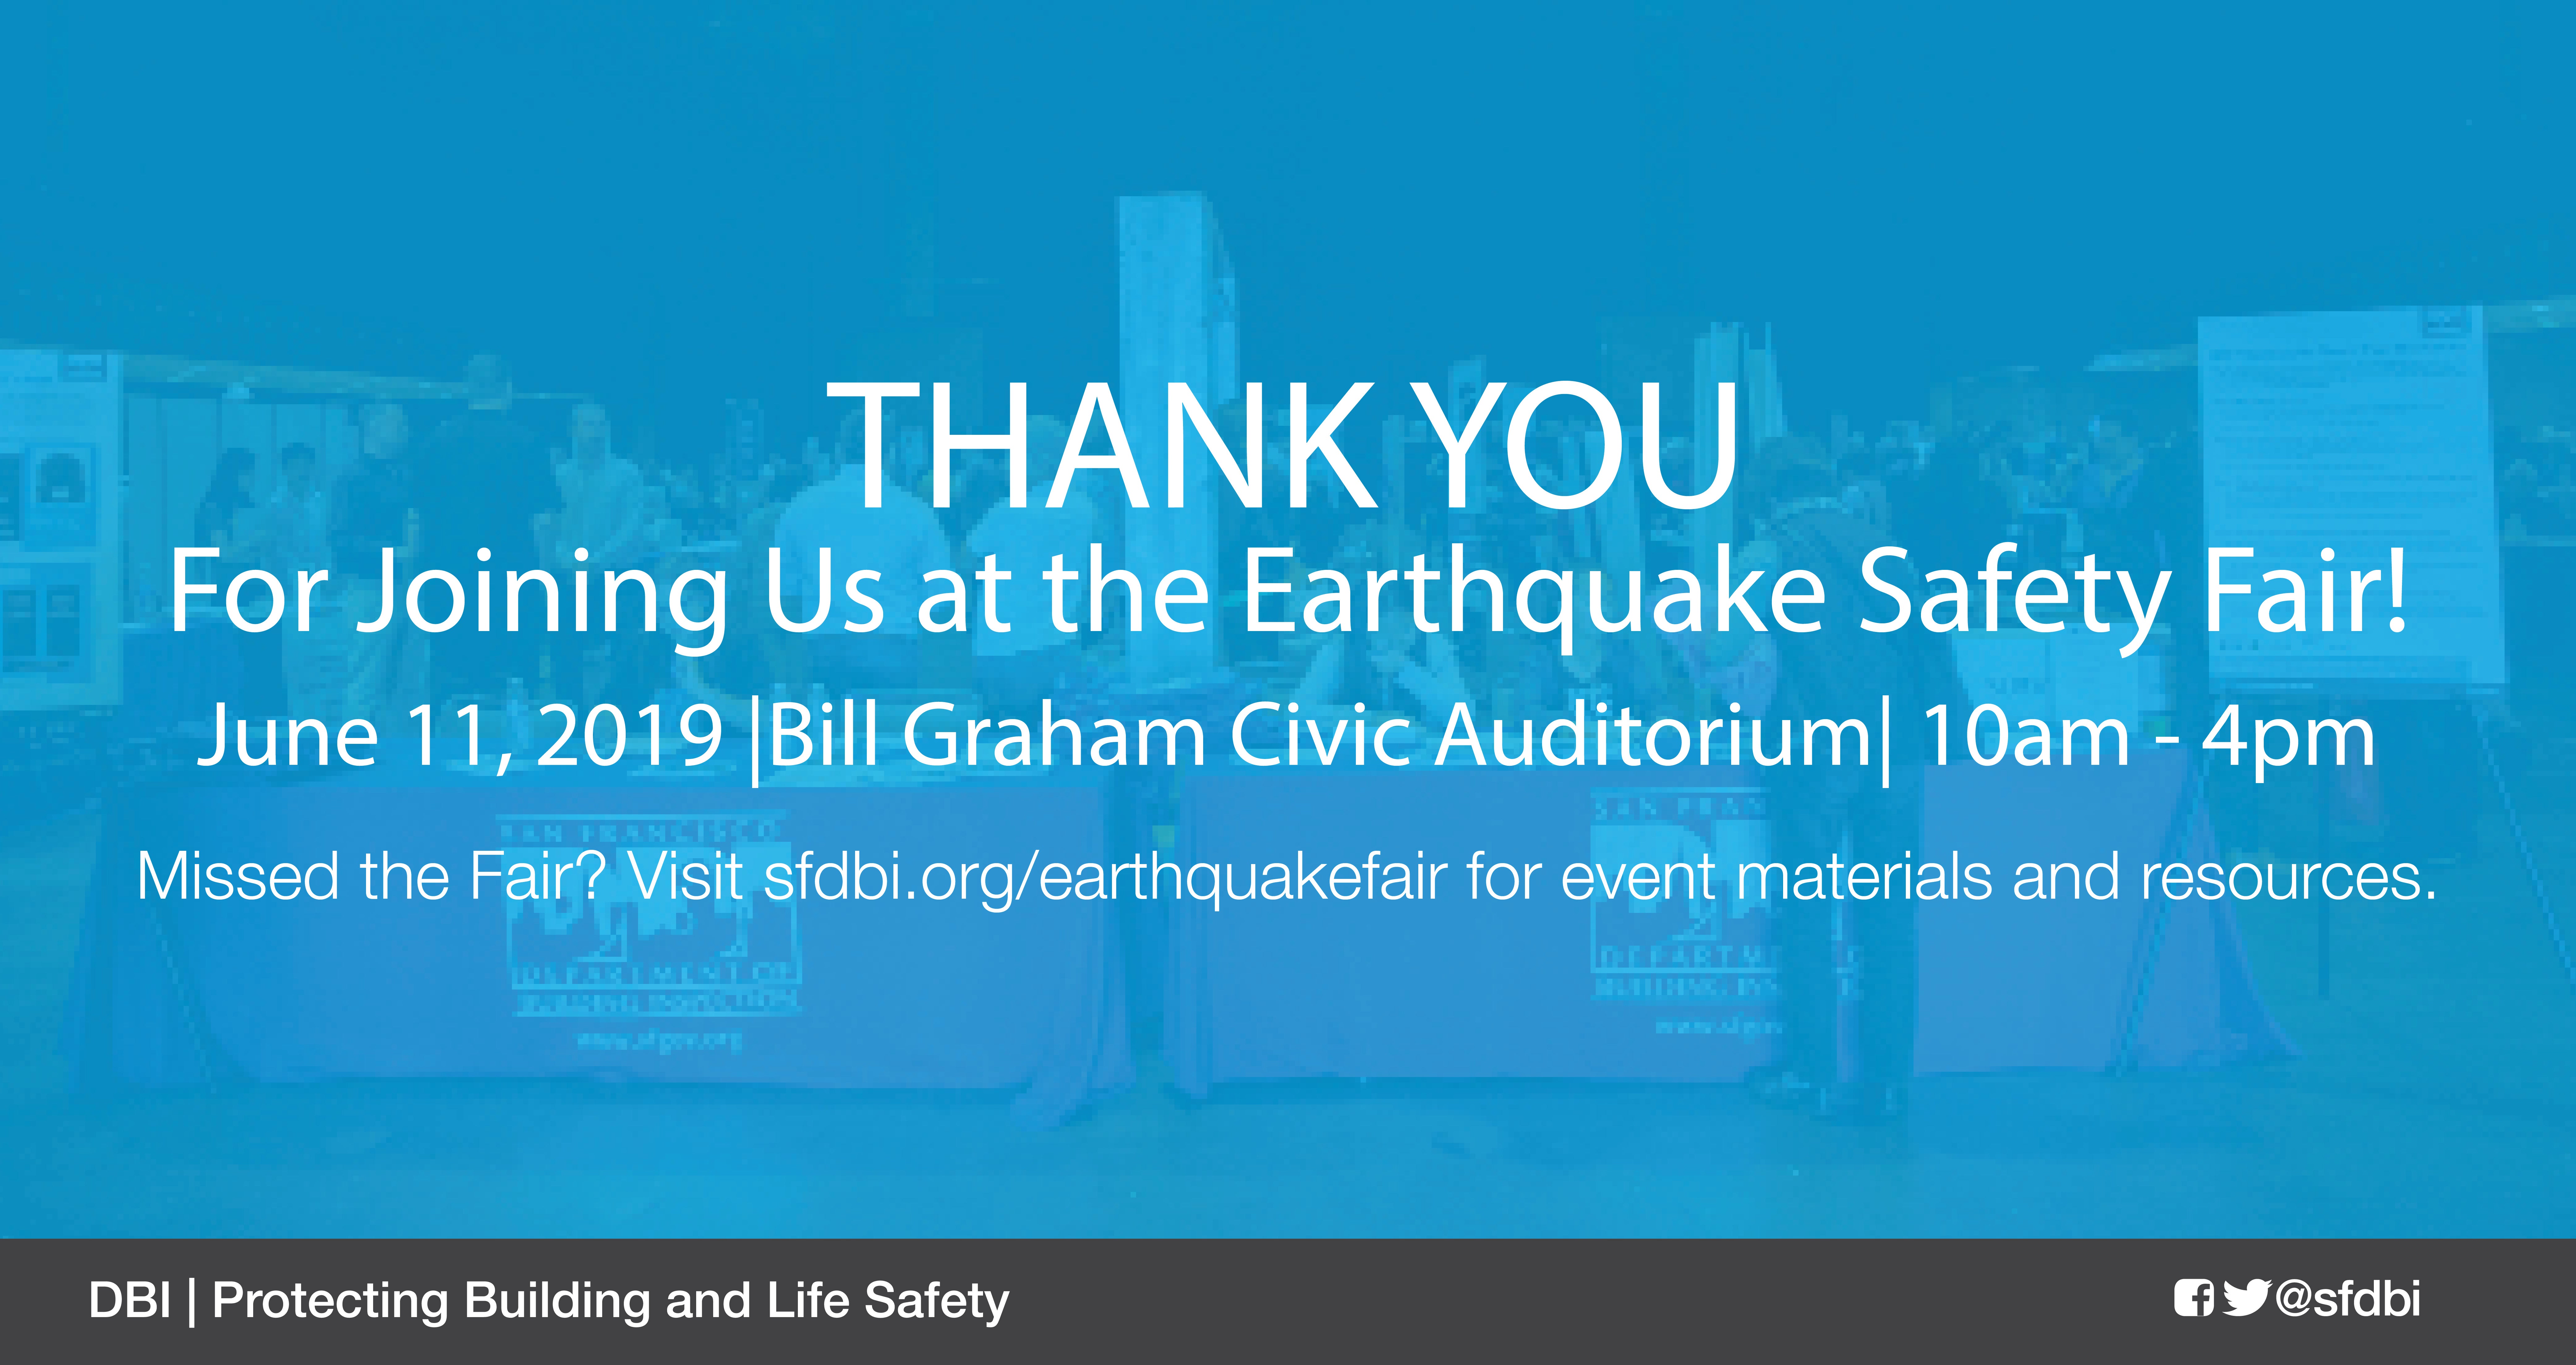 Thank you for attending the Earthquake Safety Fair